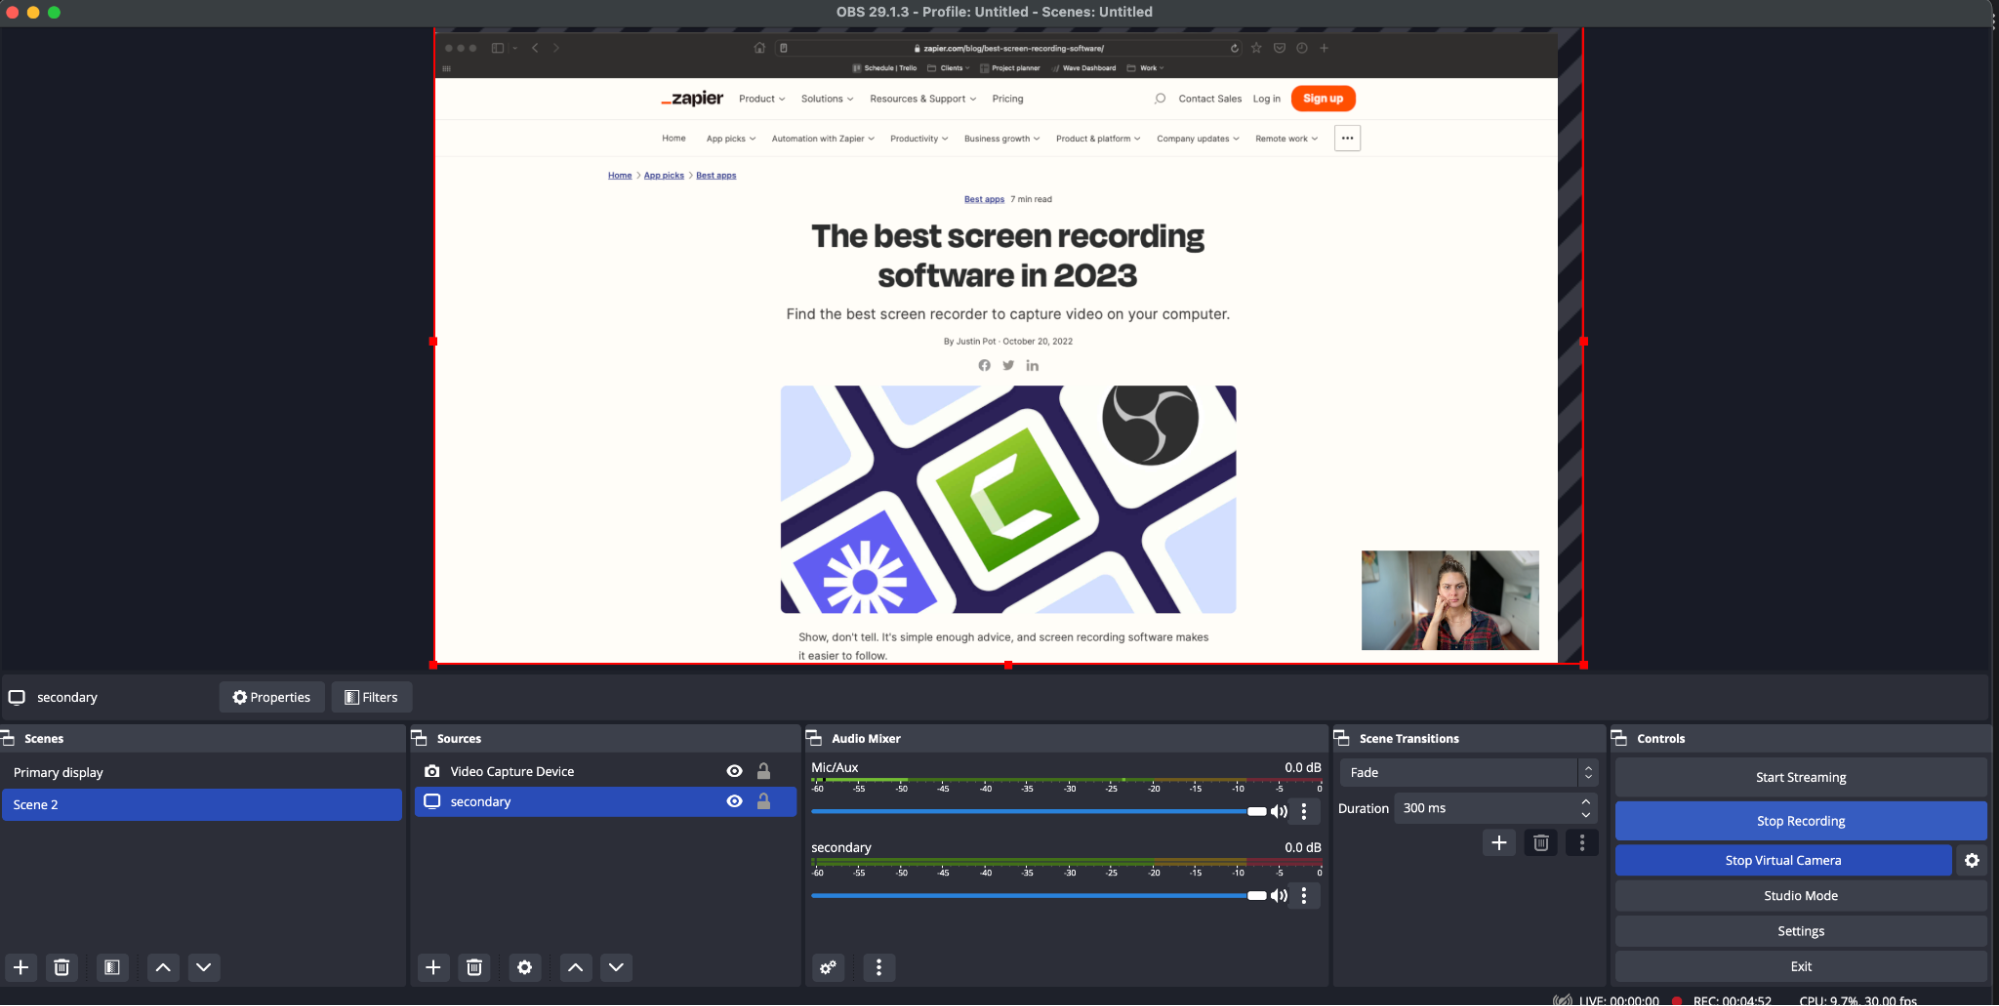 Record Like a Pro: 5 Best Free Screen Recording Software to Create